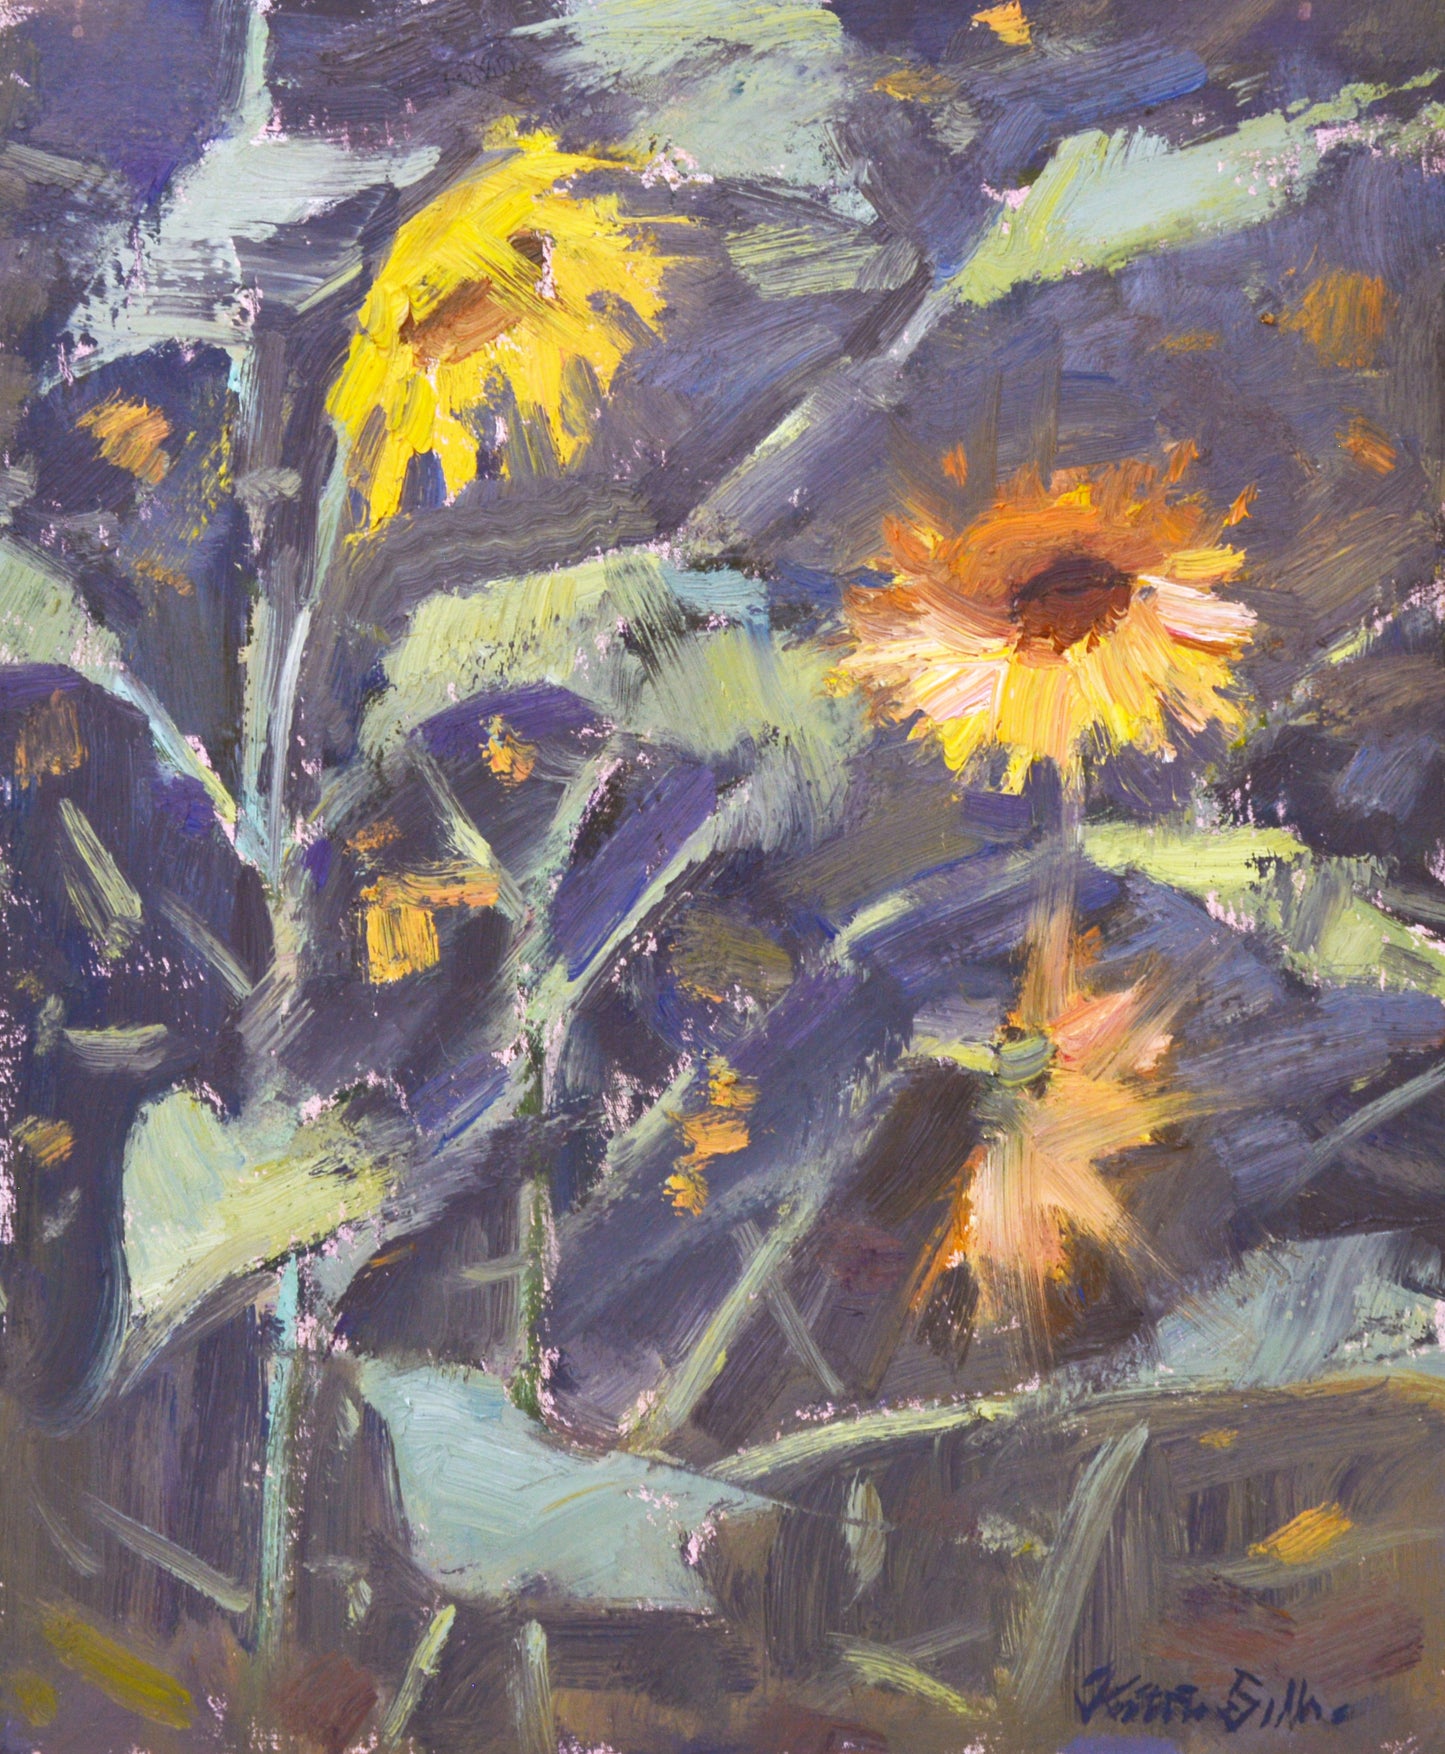 "Smoky Sunflowers" 10x8 framed original oil painting by Artist Kristina Sellers